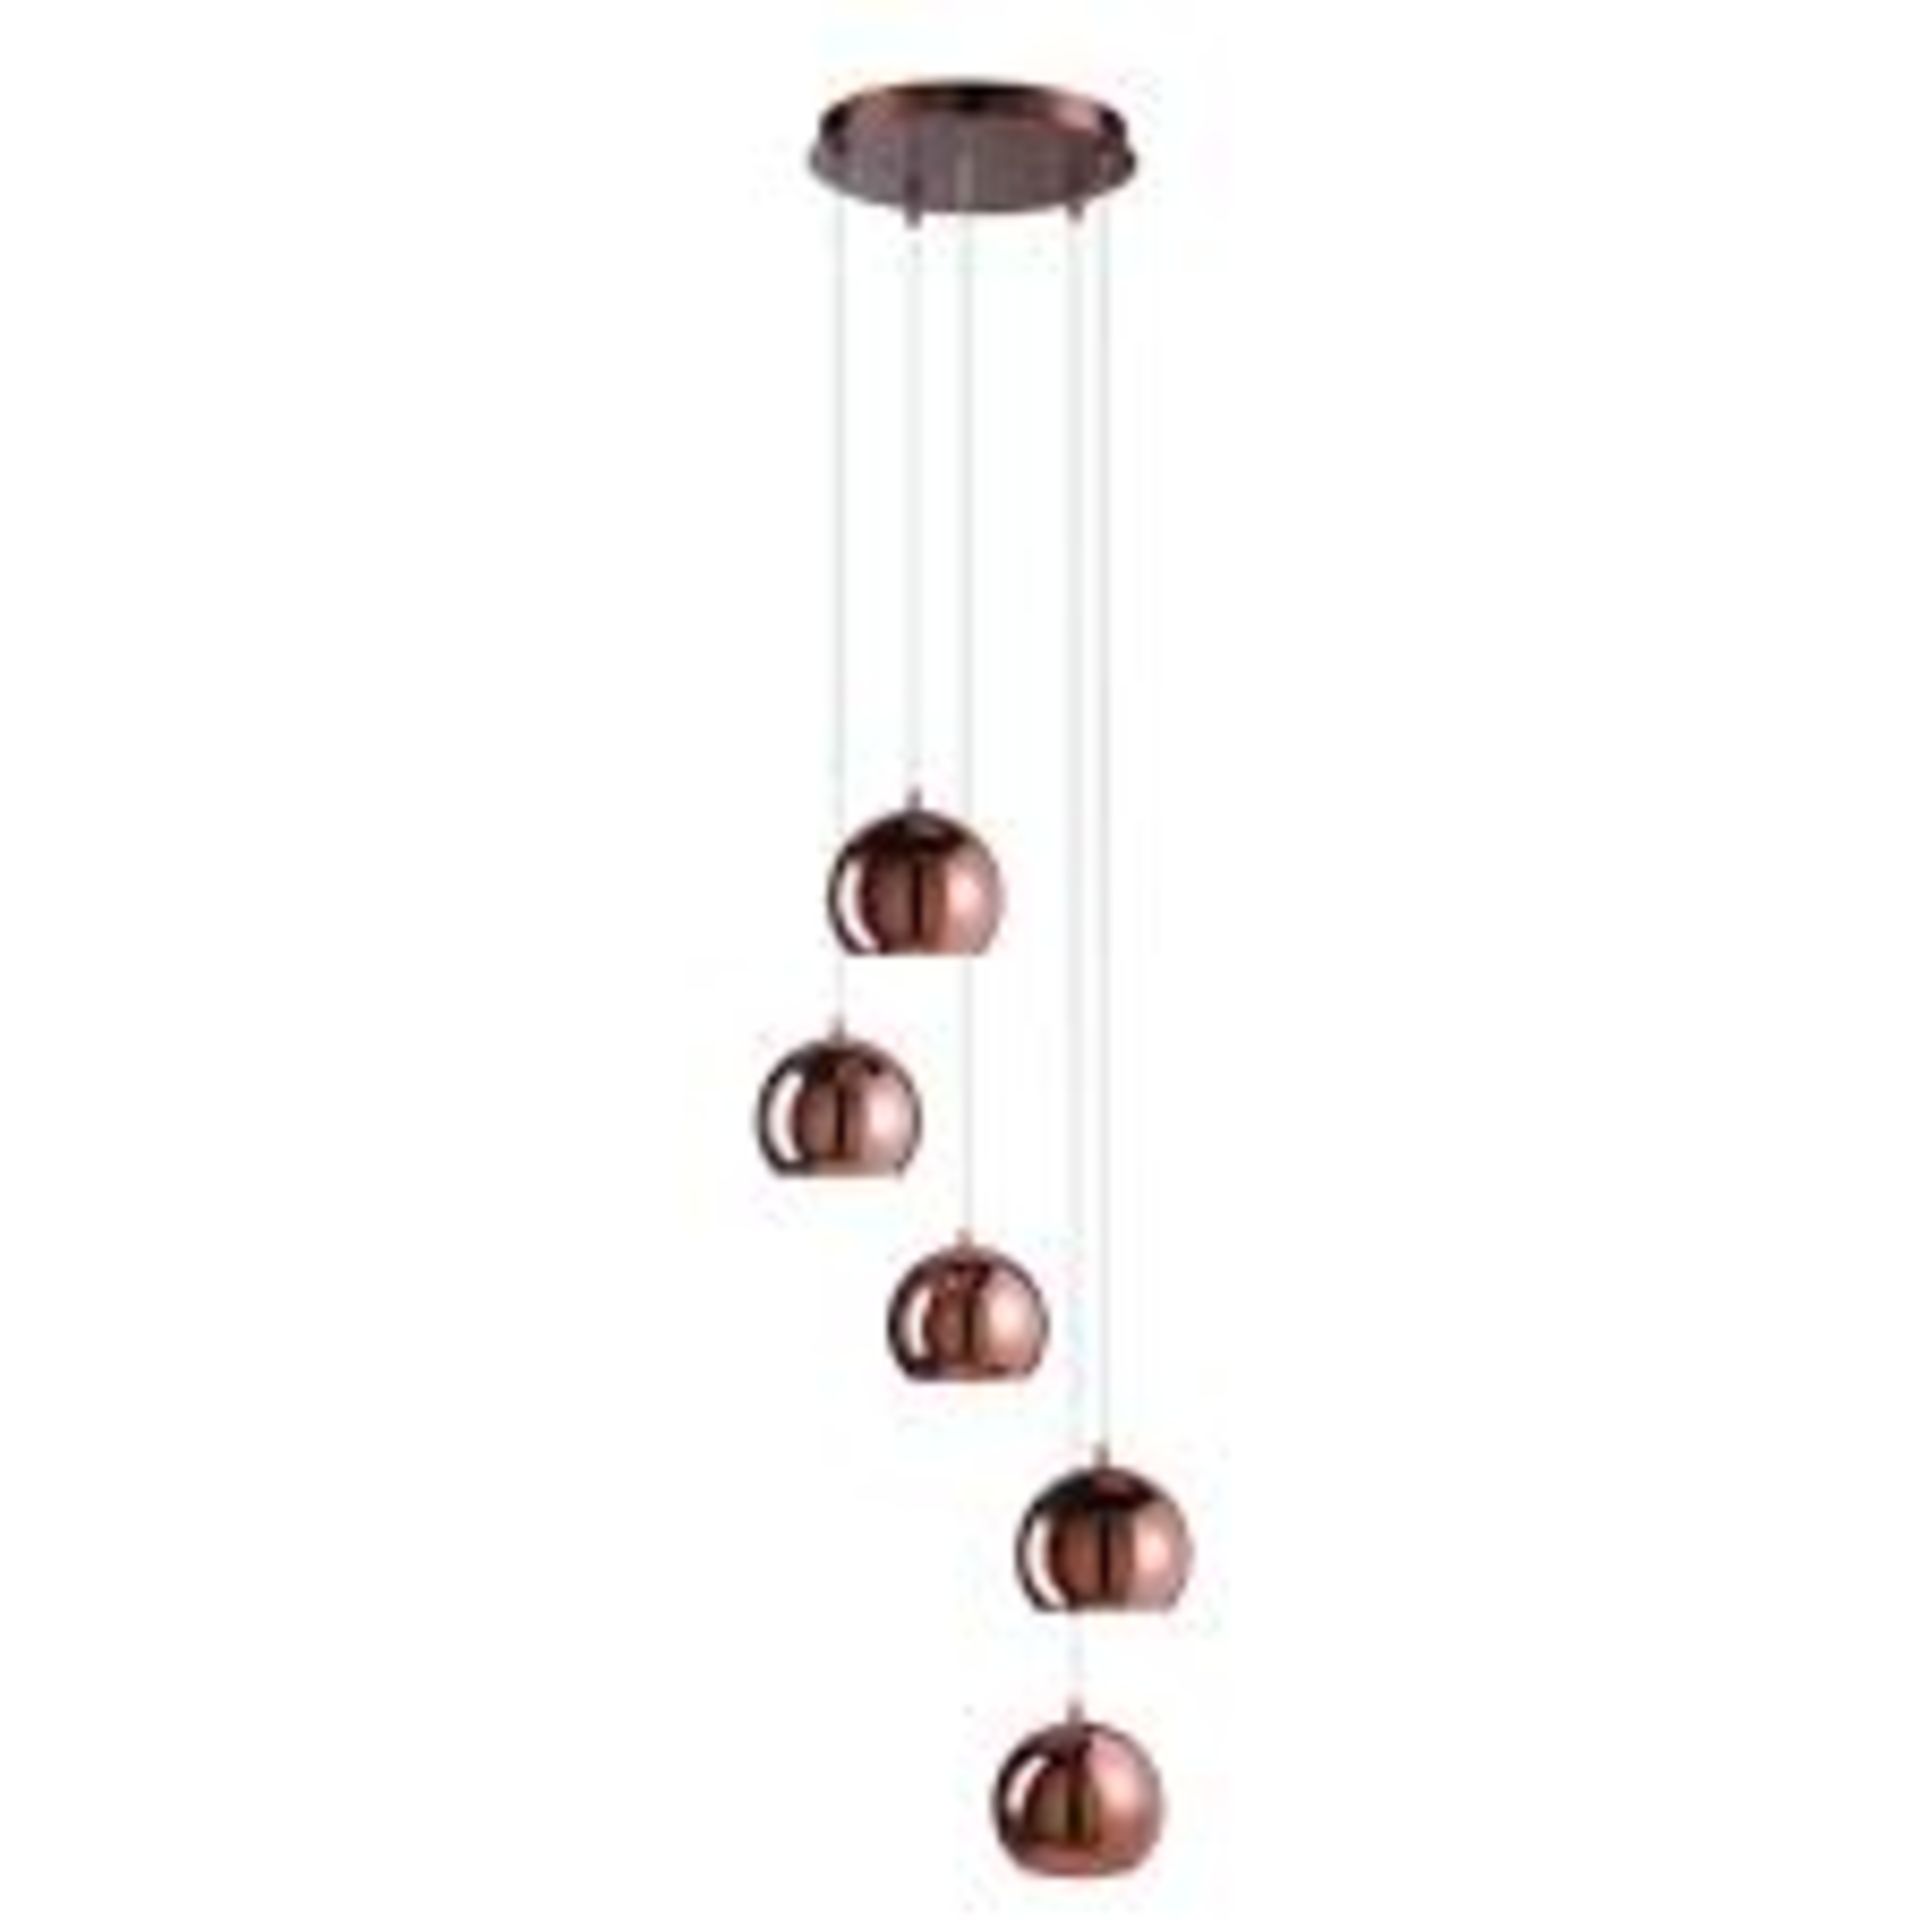 1 x Searchlight Domas 5 light copper dome shade multi-ceiling drop - Ref: 4049-5CU - RRP: £198.00 - Image 3 of 3